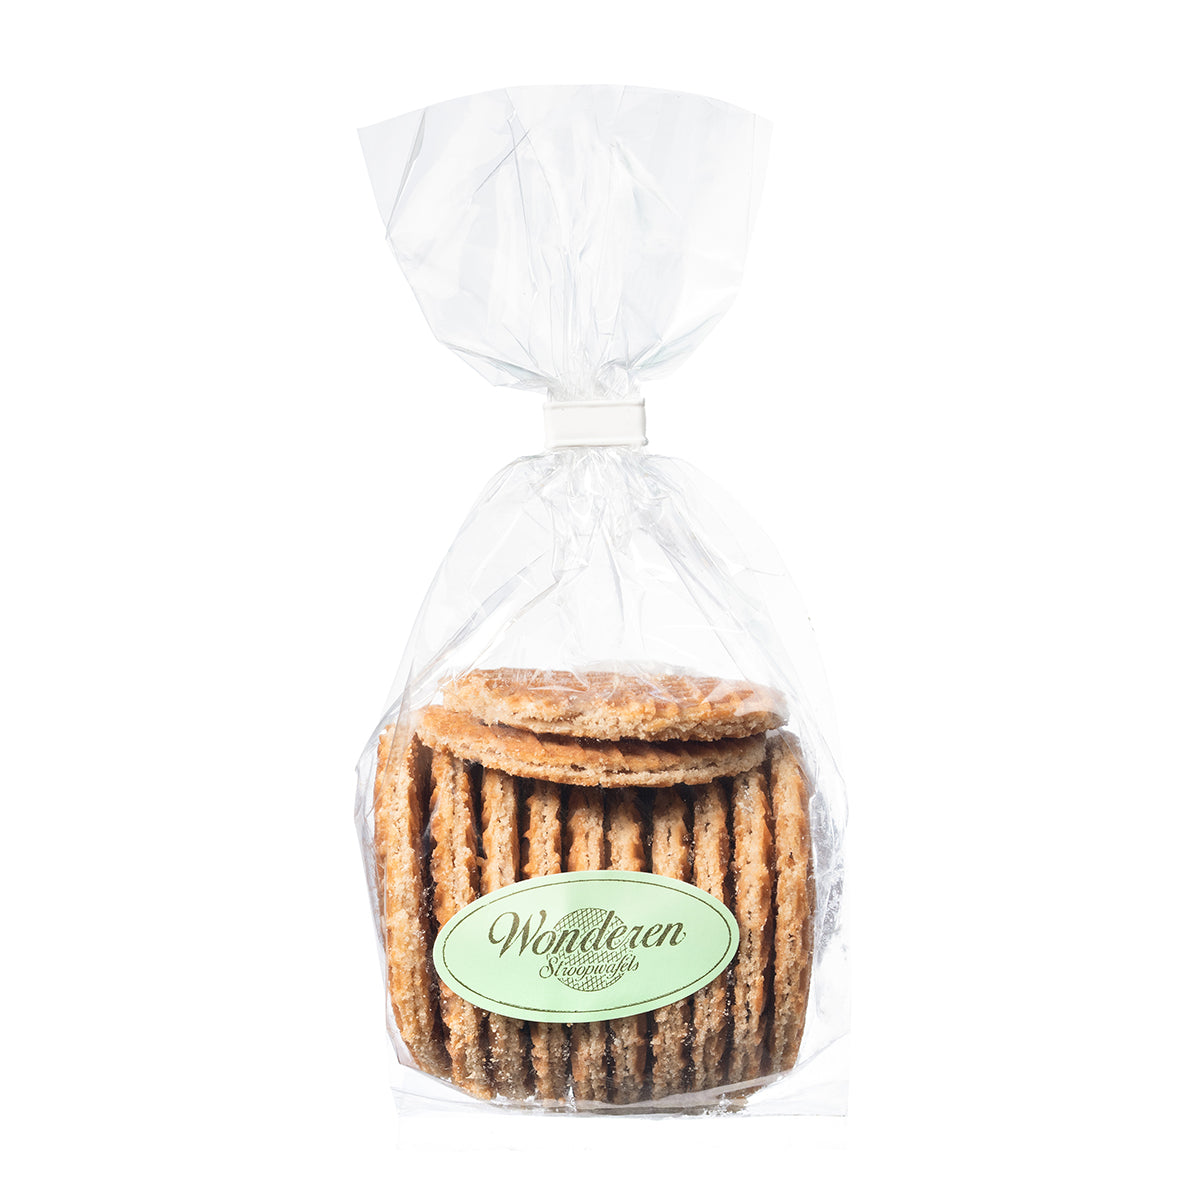 A pack of Wonderen Stroopwafels 12 mini pack sitting on a white background.